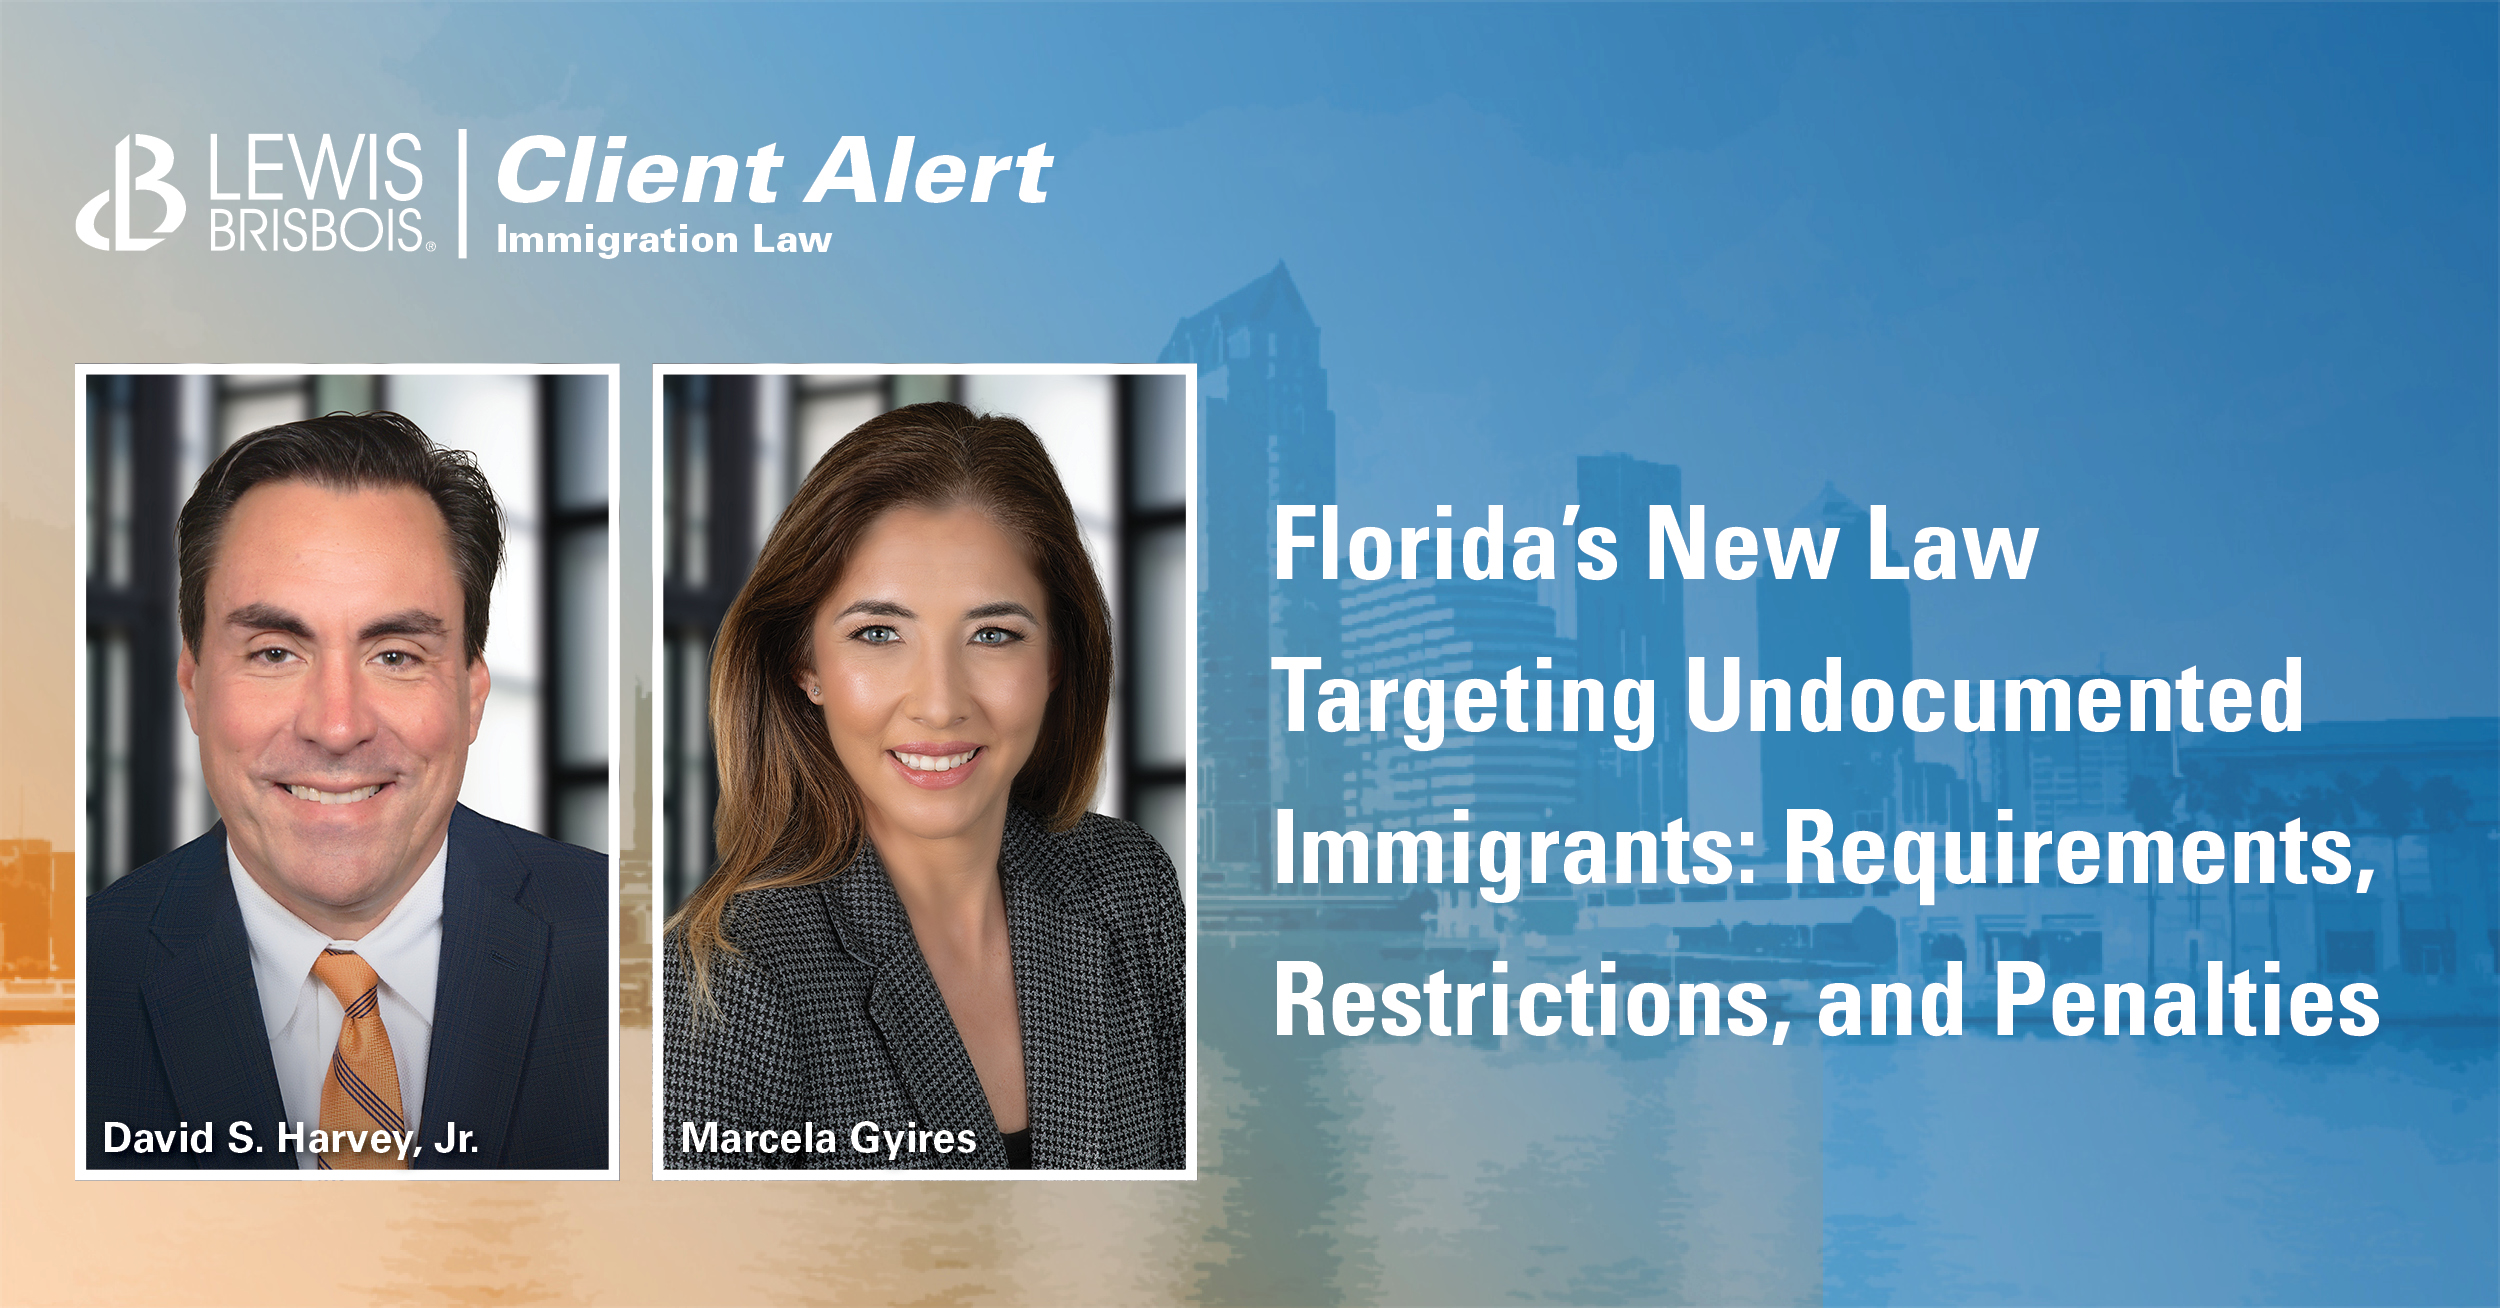 Florida’s New Law Targeting Undocumented Immigrants Requirements